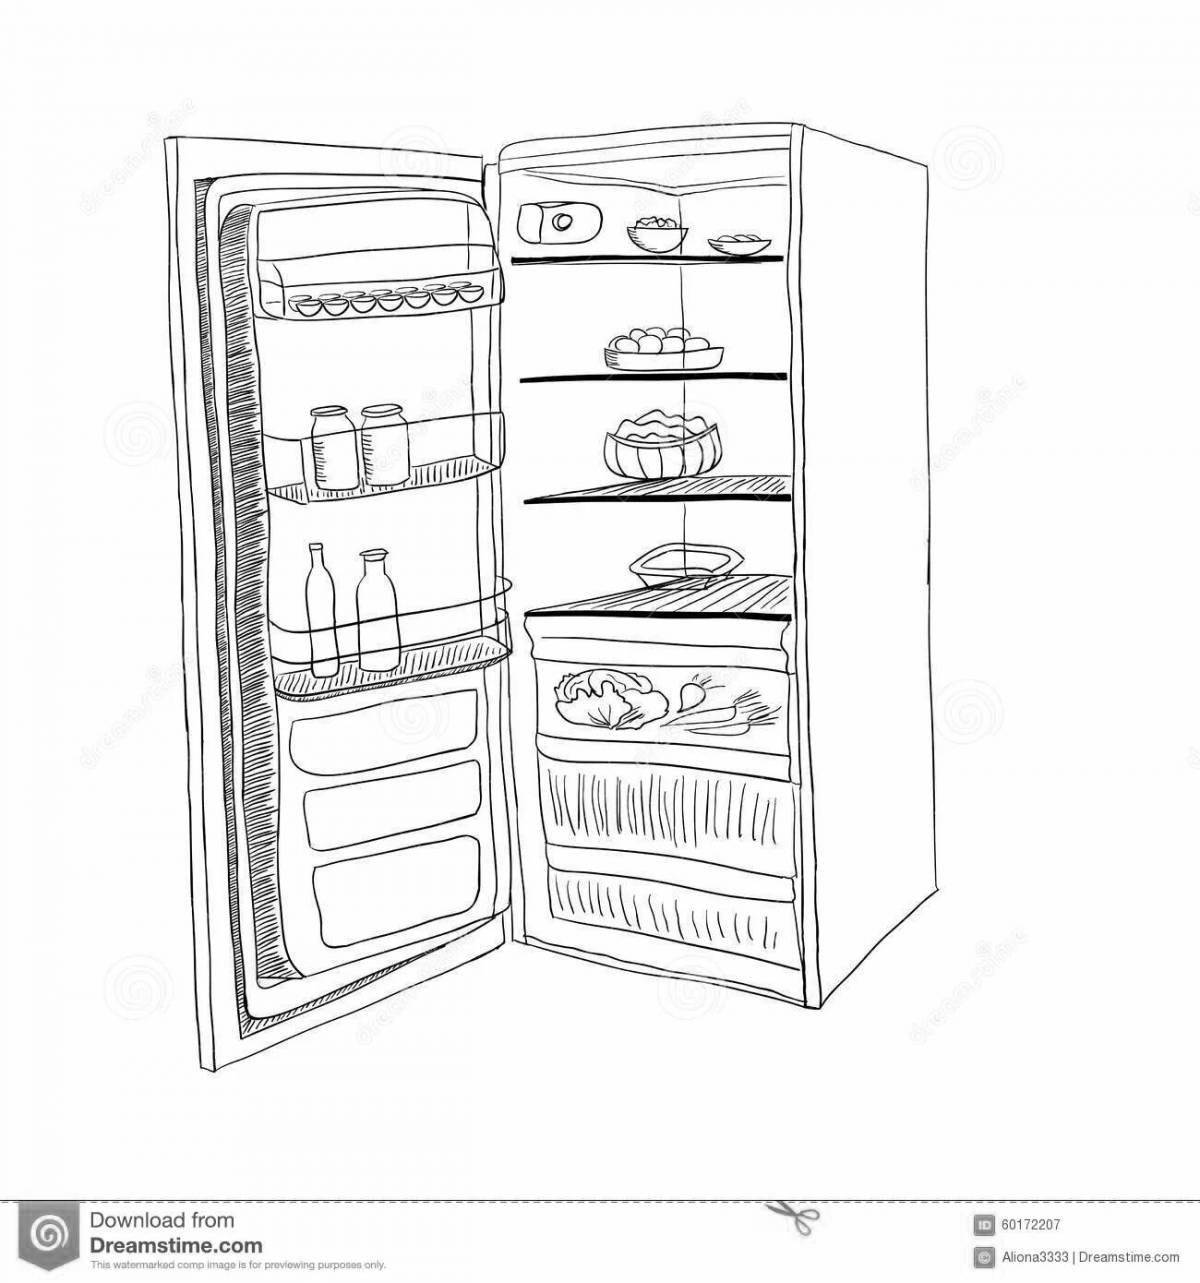 Coloring page glowing empty refrigerator